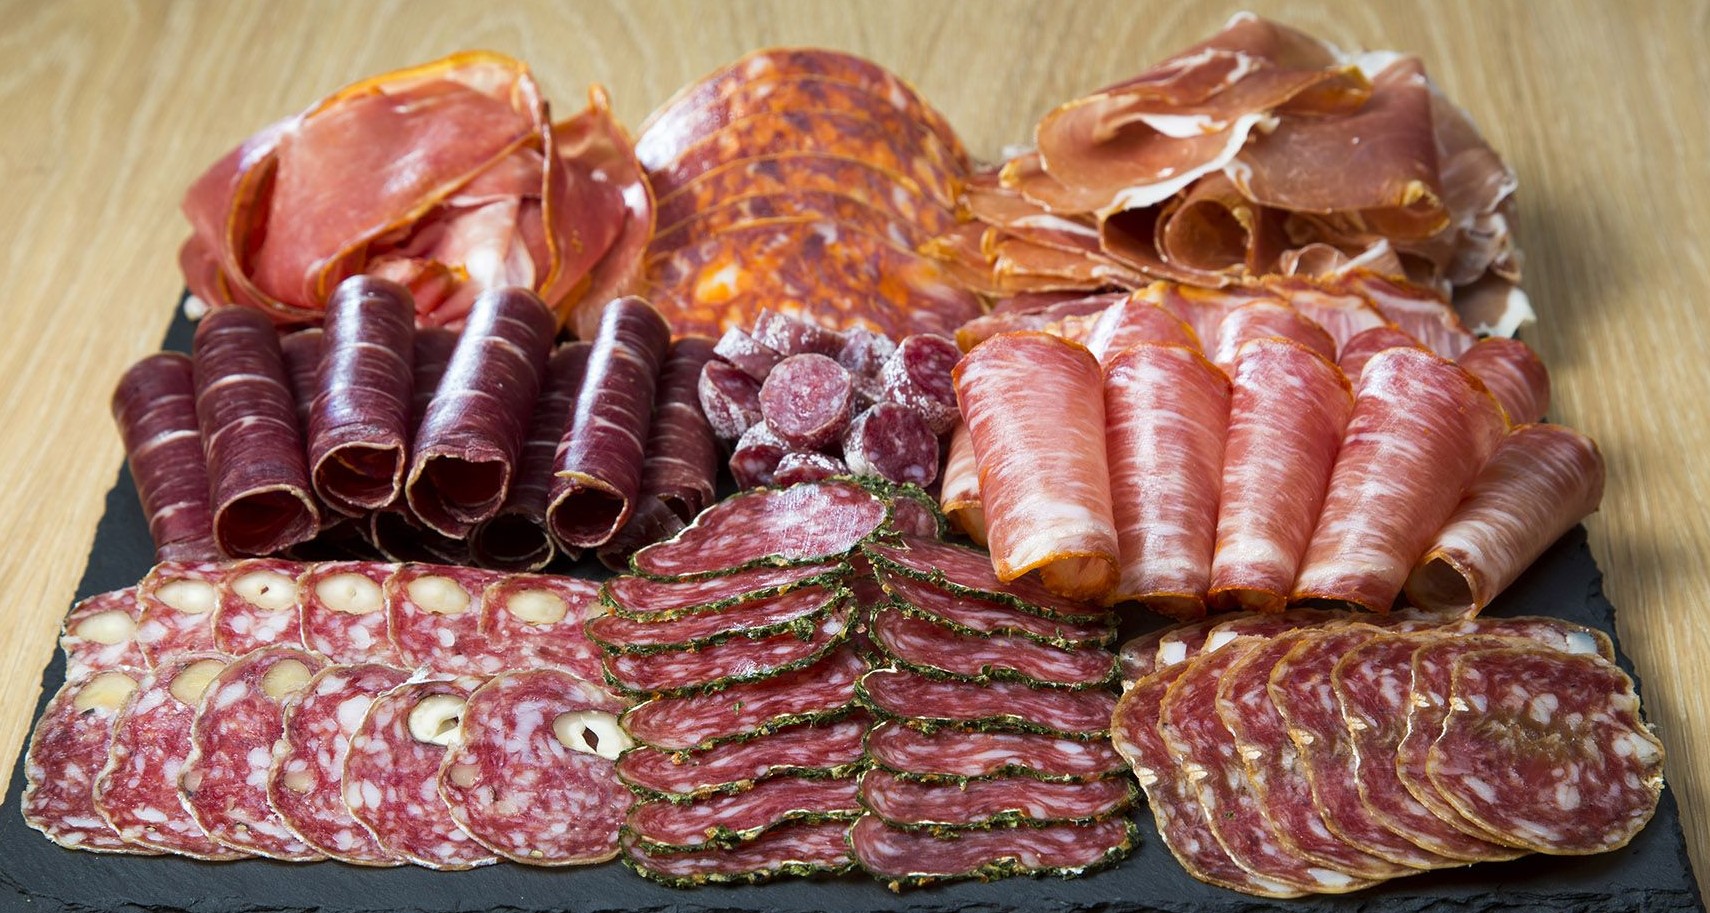 Charcuterie platter 2 pers.